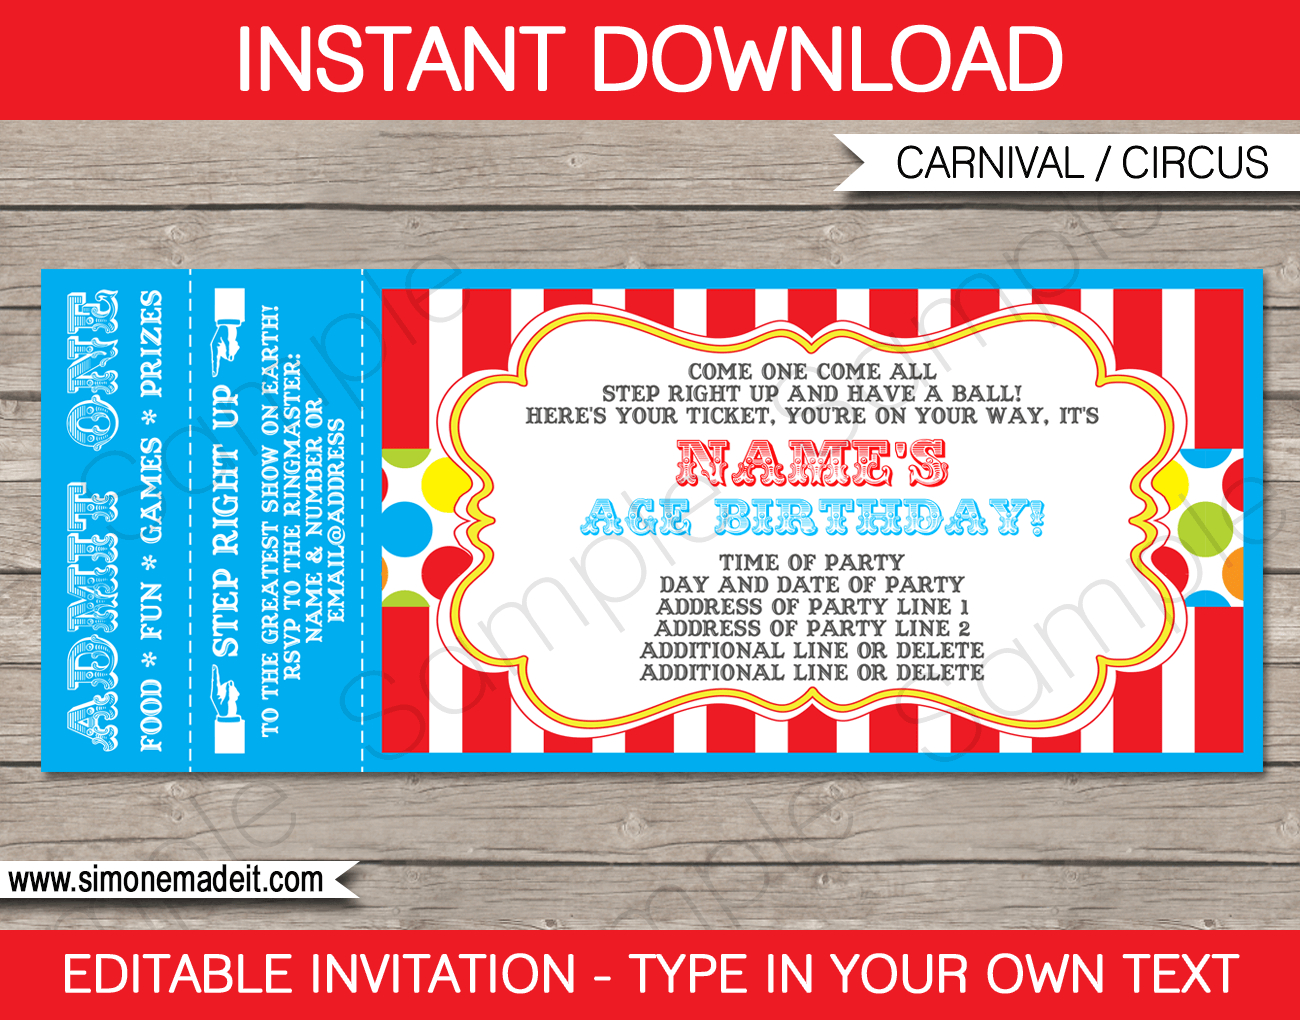 Carnival Party Ticket Invitation Template Carnival Or Circus for size 1300 X 1020